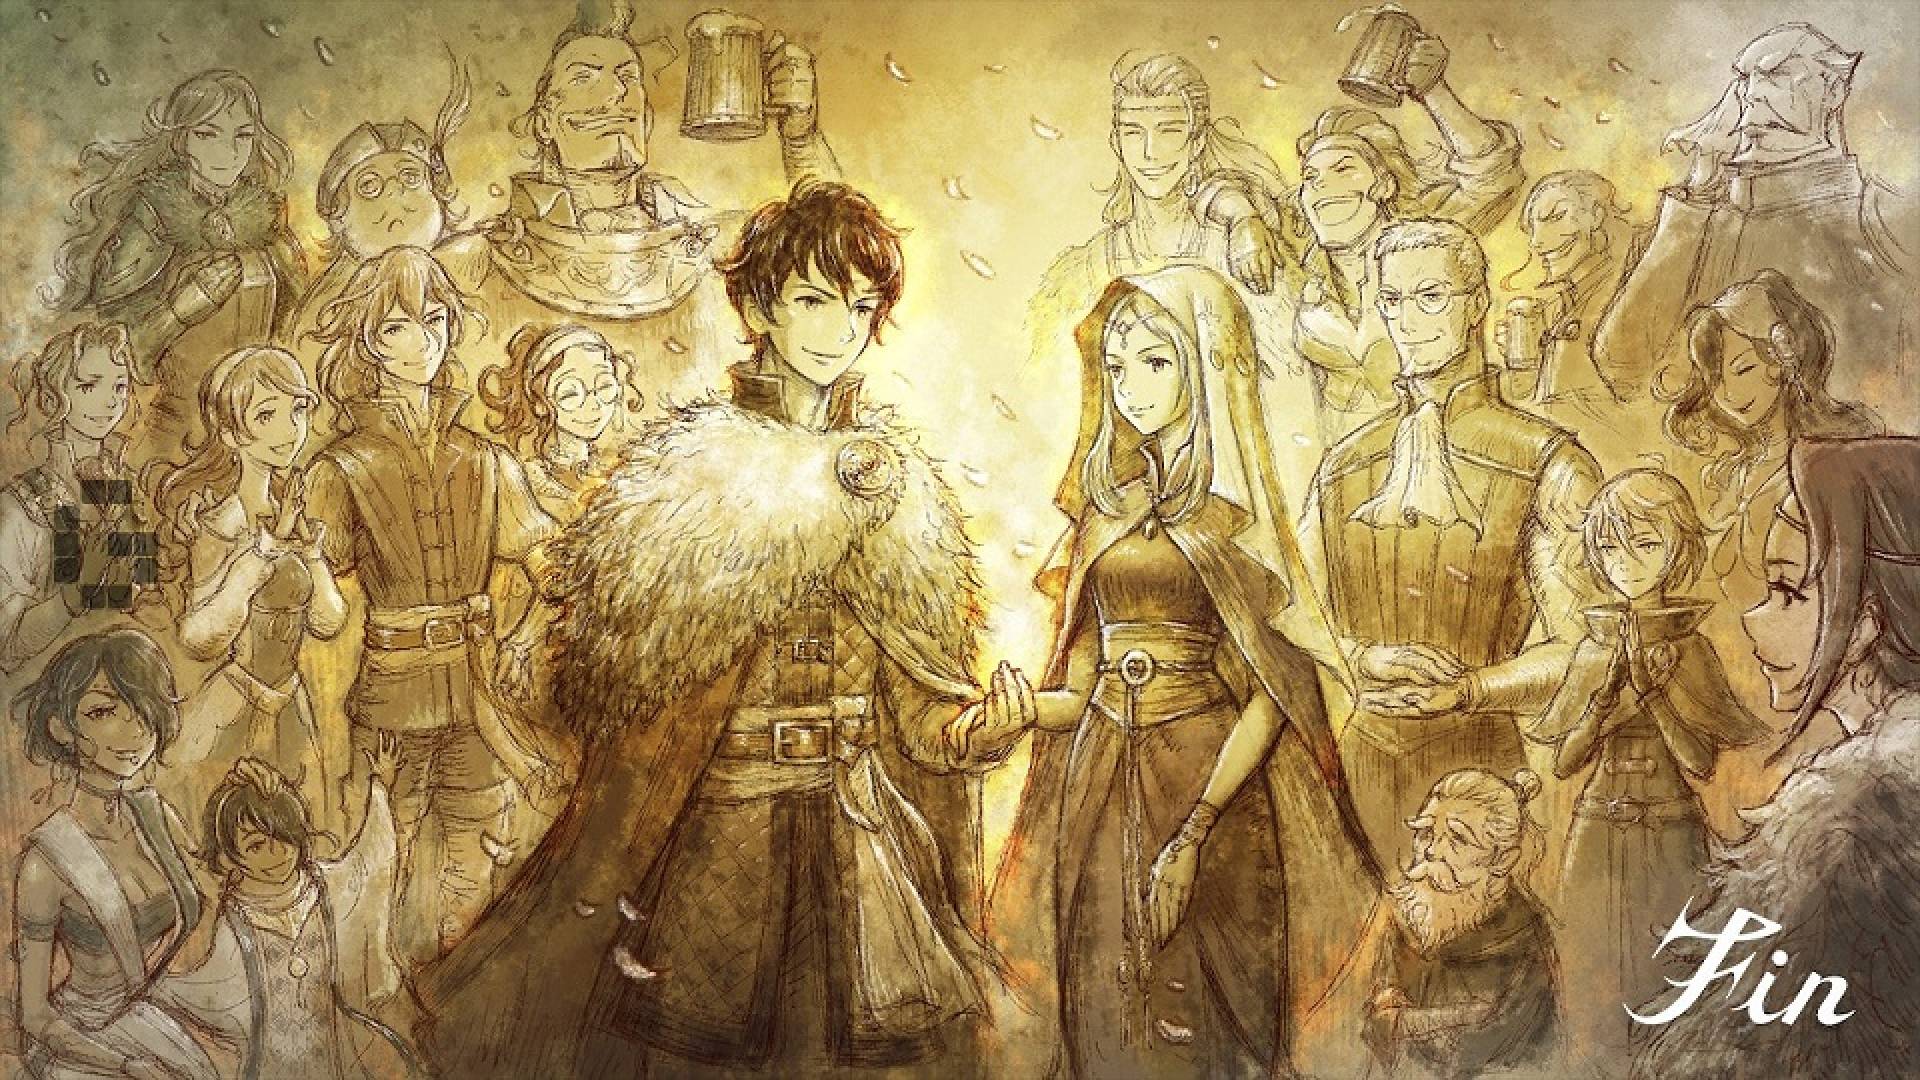 Triangle Strategy golden route: Key art for the game shows the main cast of characters, joined collectively in a triumphant ending. 